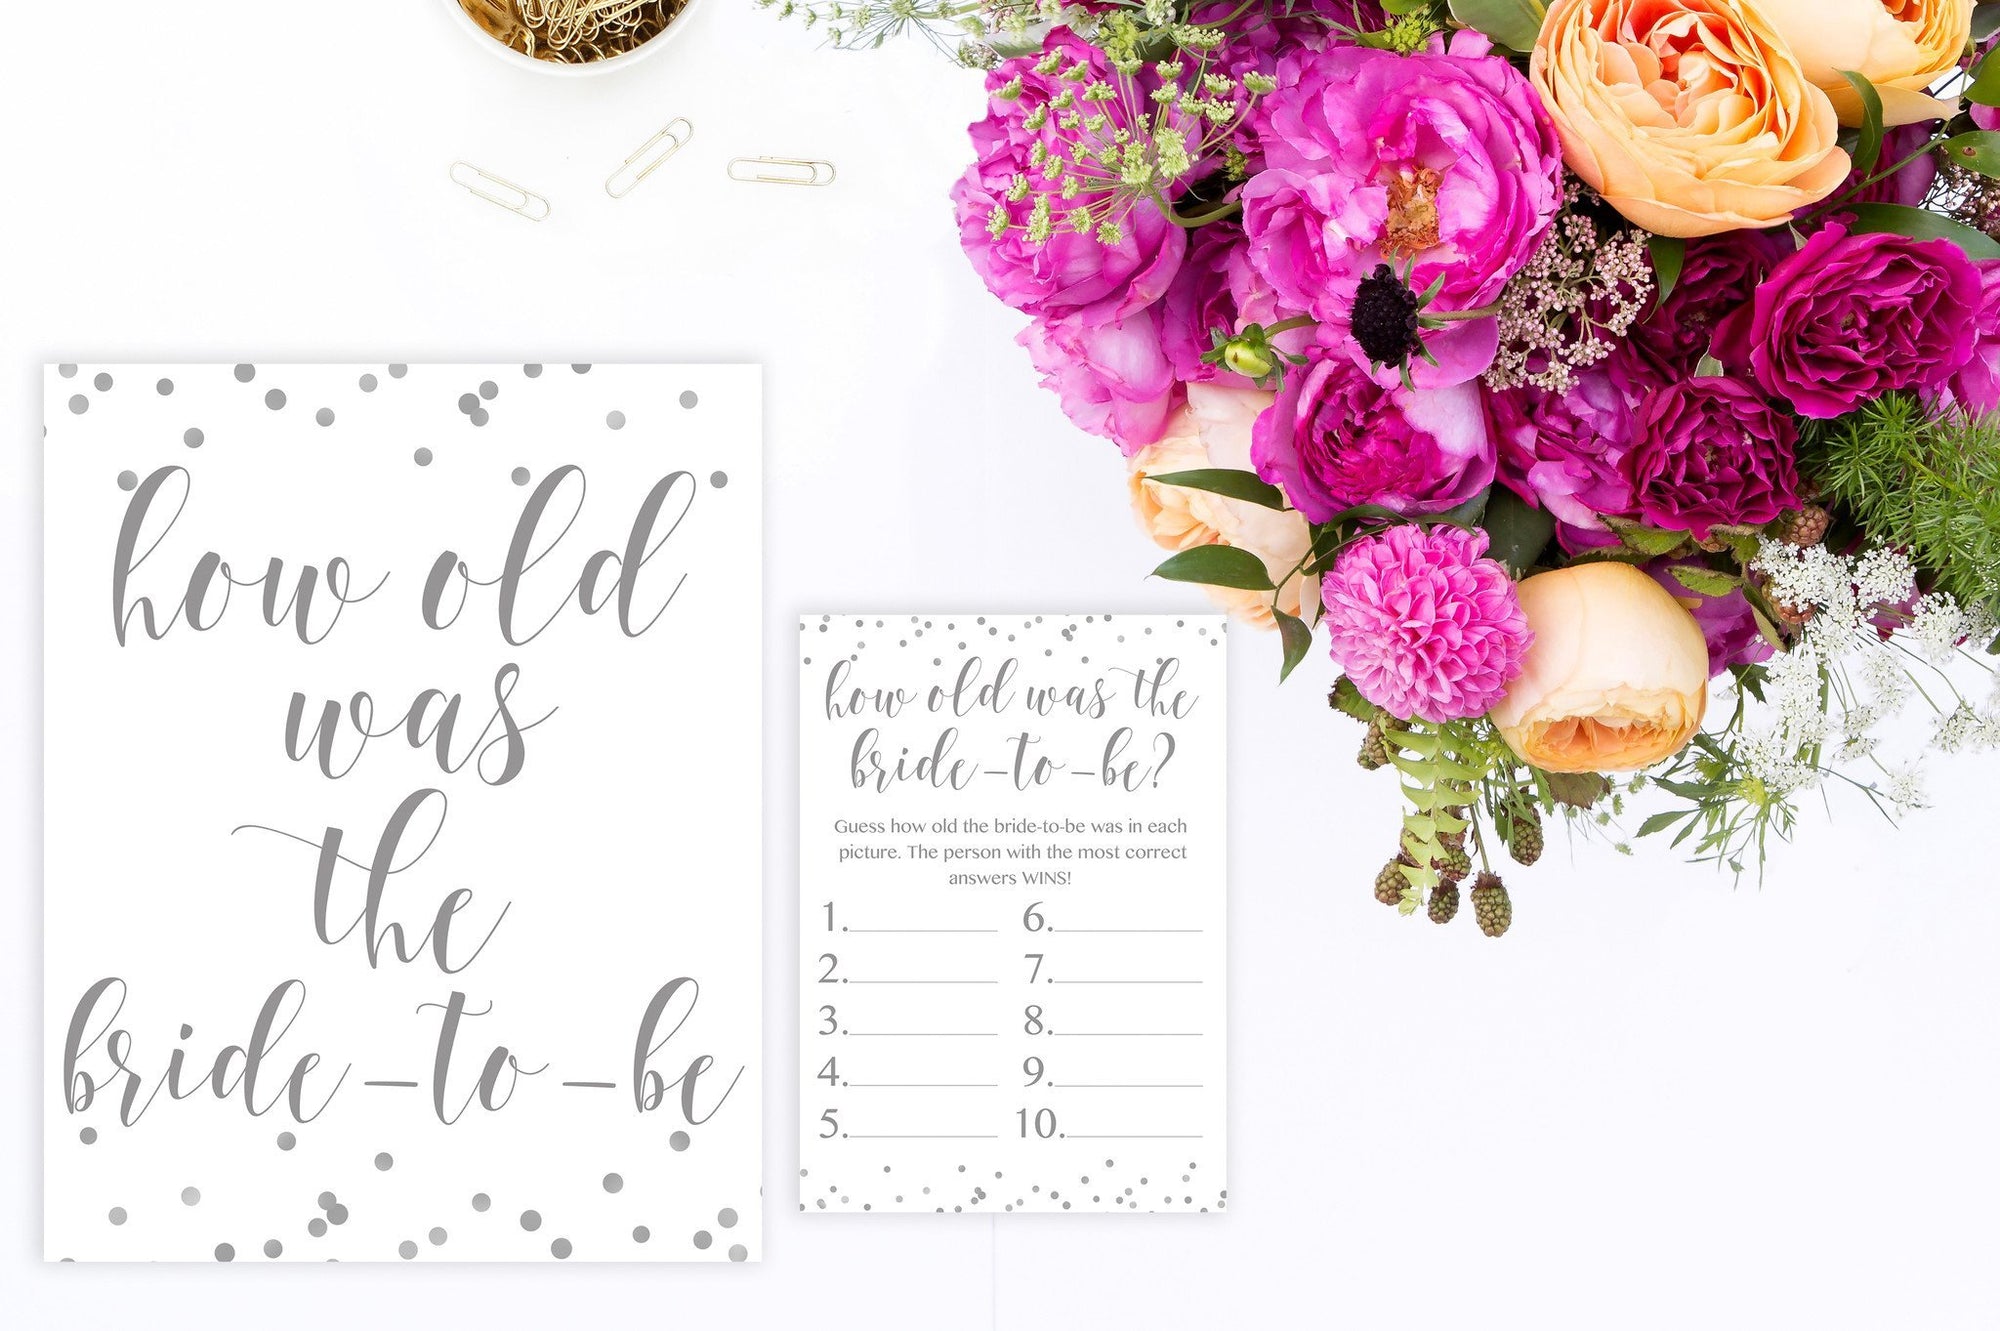 How Old Was The Bride-to-Be - Grey Printable - Pretty Collected